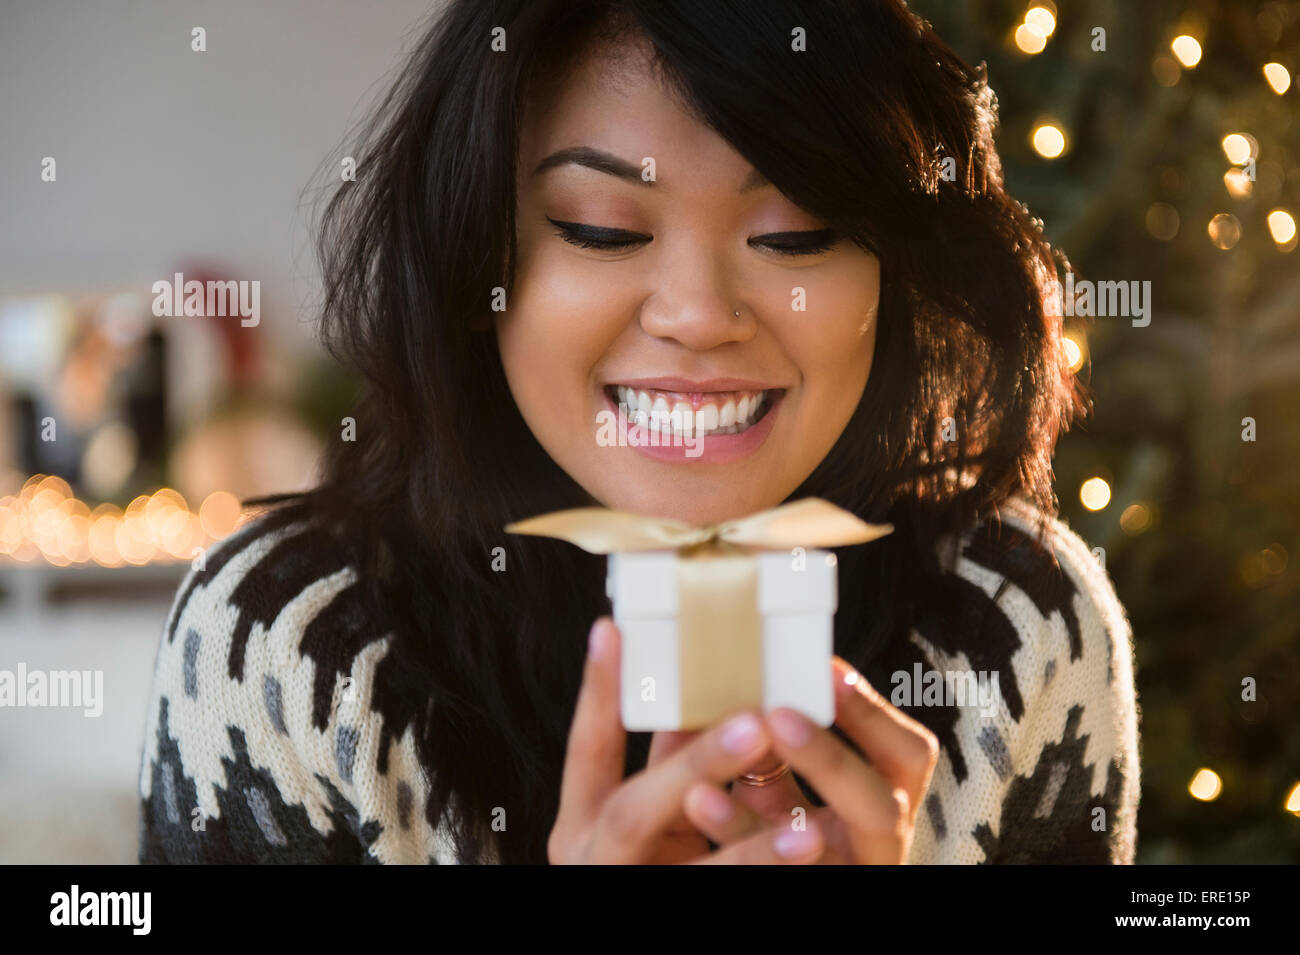 Pacific Islander woman holding small wrapped gift Banque D'Images